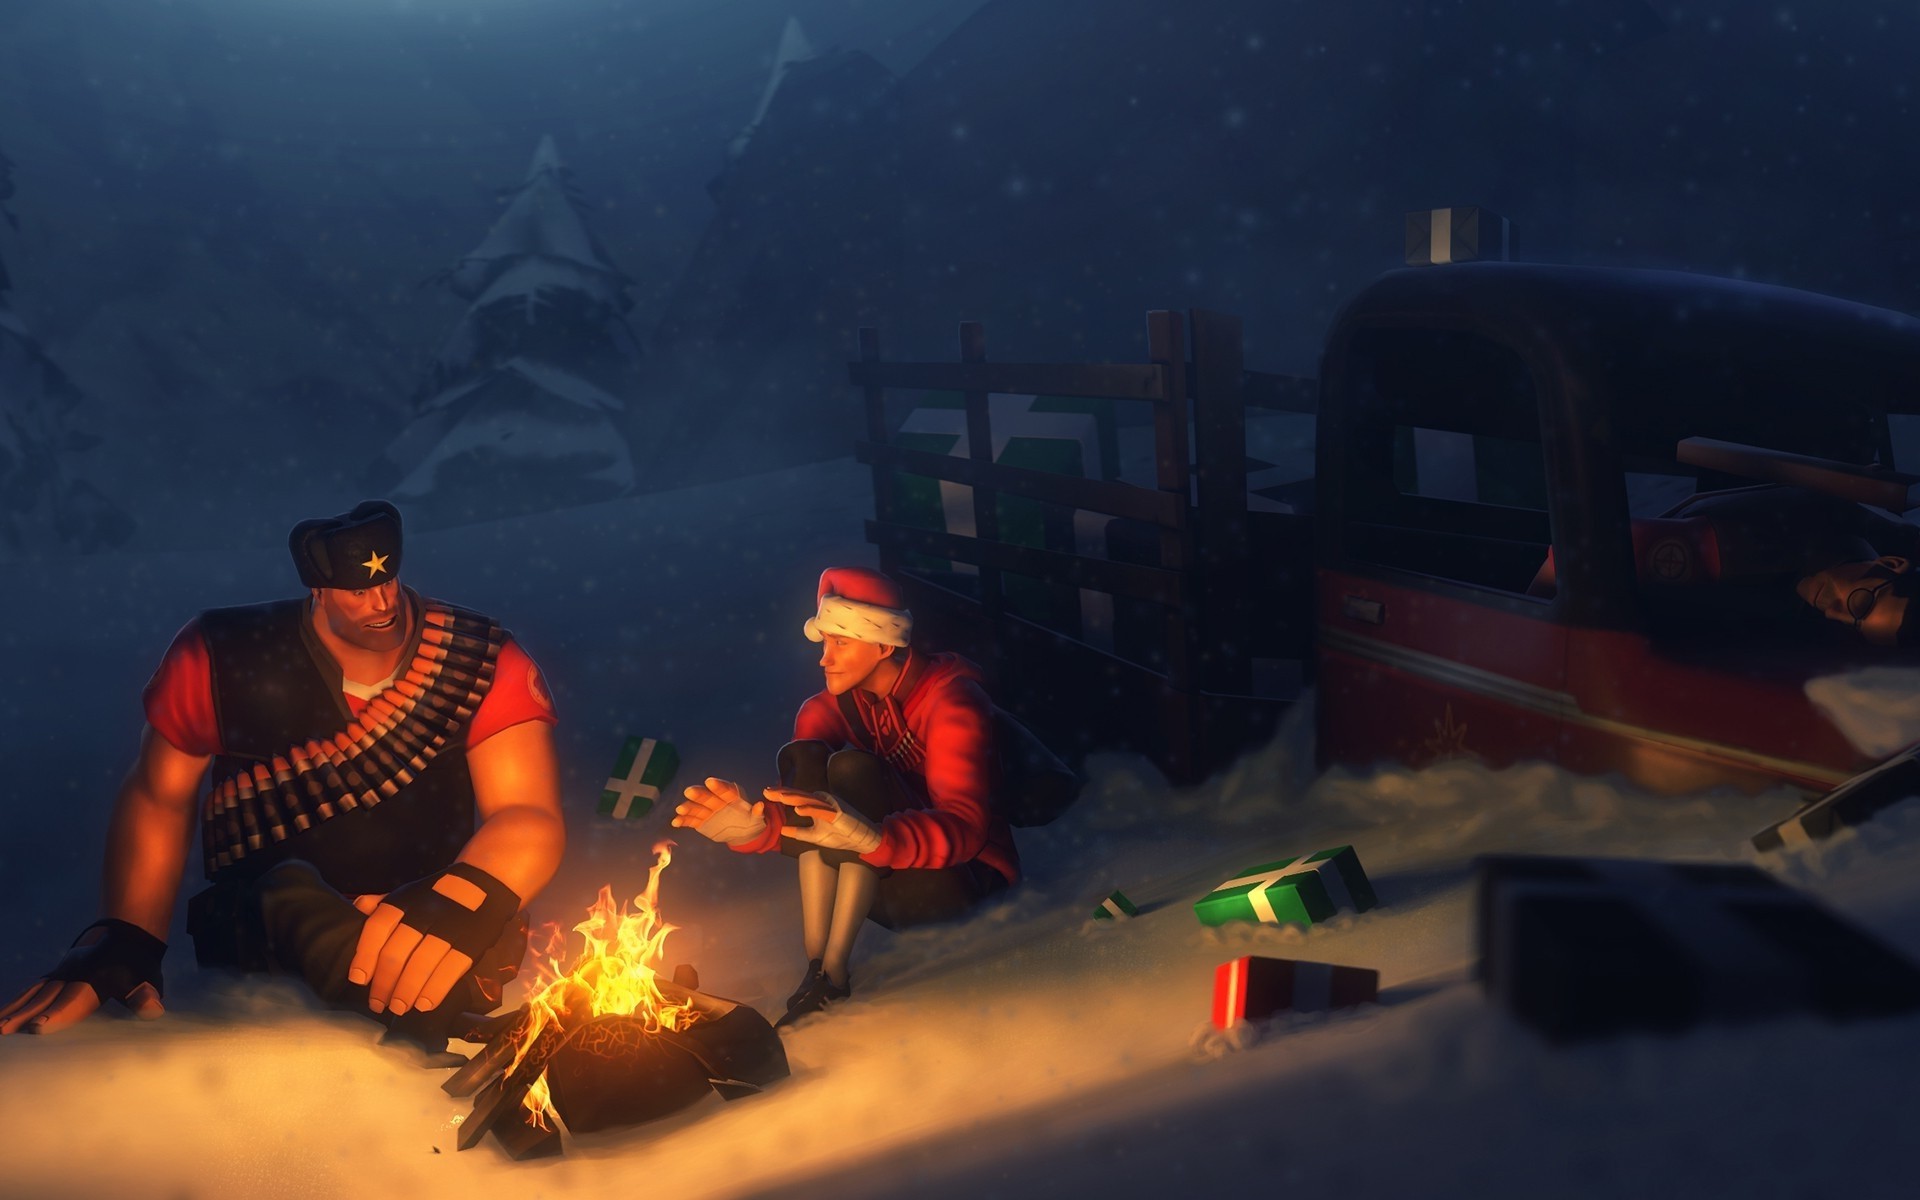 Scout (character), Sniper (TF2), Video Games, Digital Art, Team Fortress 2, Fire, Camping, Presents, Happy New Year, Truck, Heavy, Snow, Campfire Wallpaper